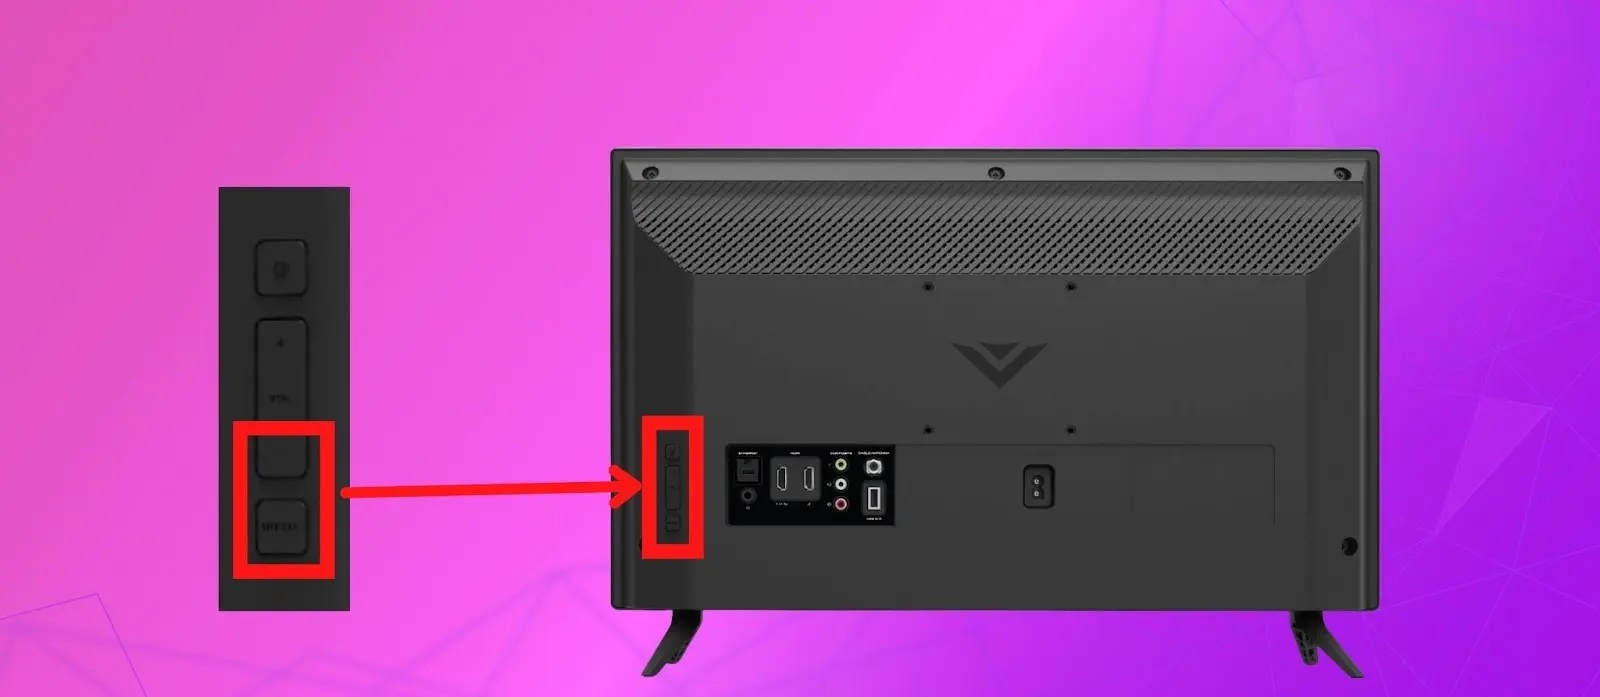 How To Turn Down Volume On Vizio Smart TV Without Remote